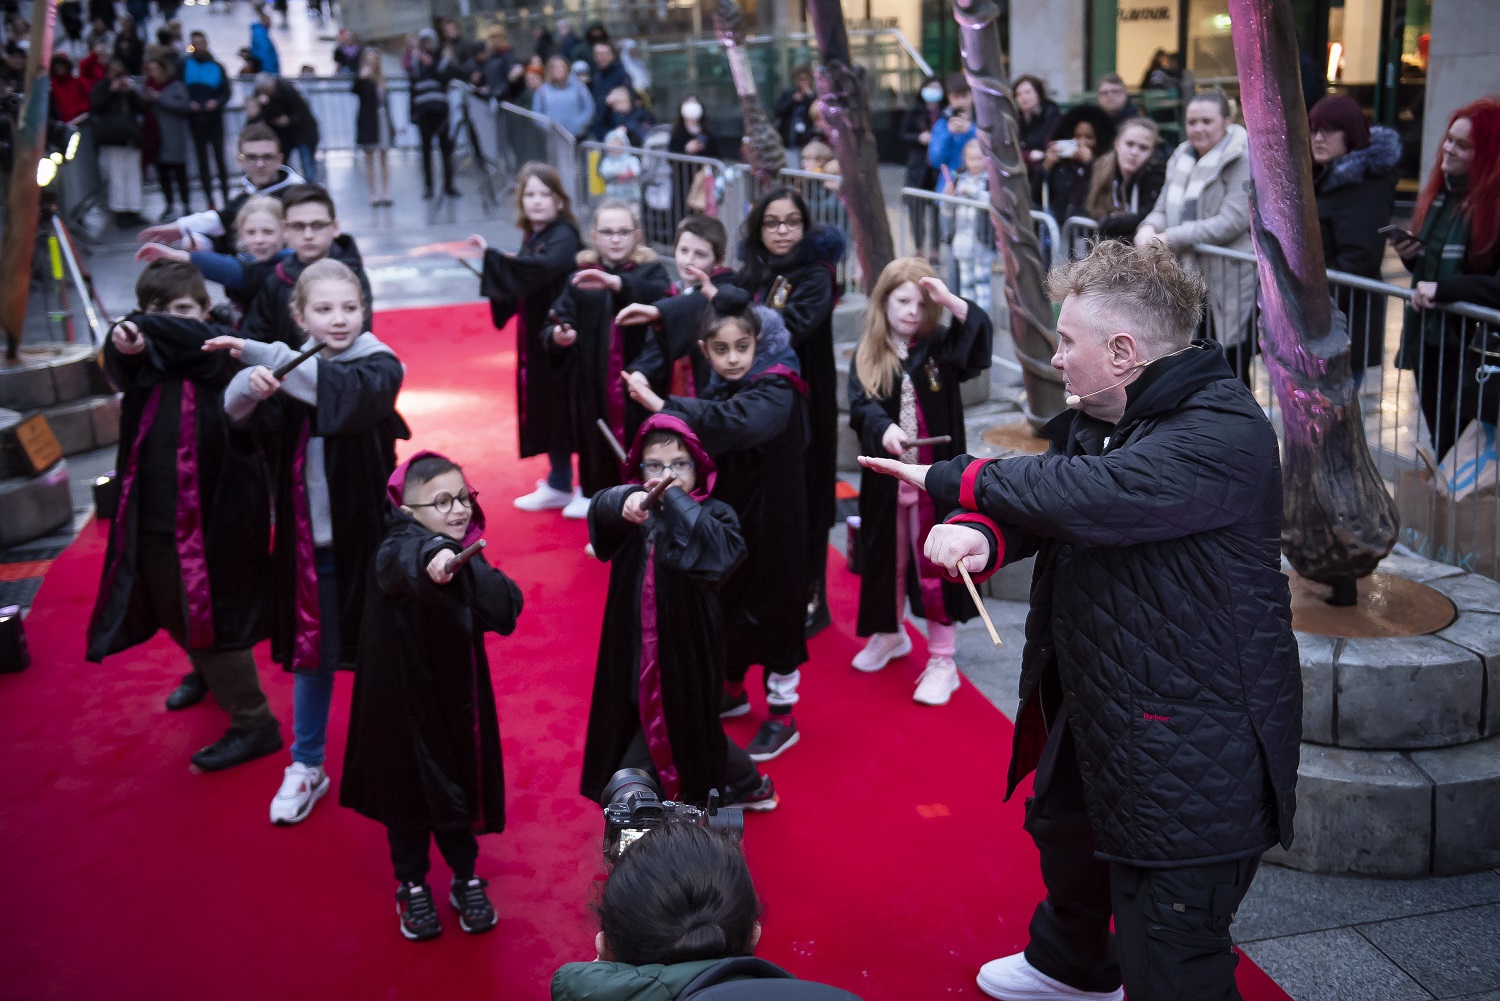 Paul Harris teaches wand combat choreography to young fans at the Wizarding World wand installation at the Bullring in Birmingham on March 11, 2022.